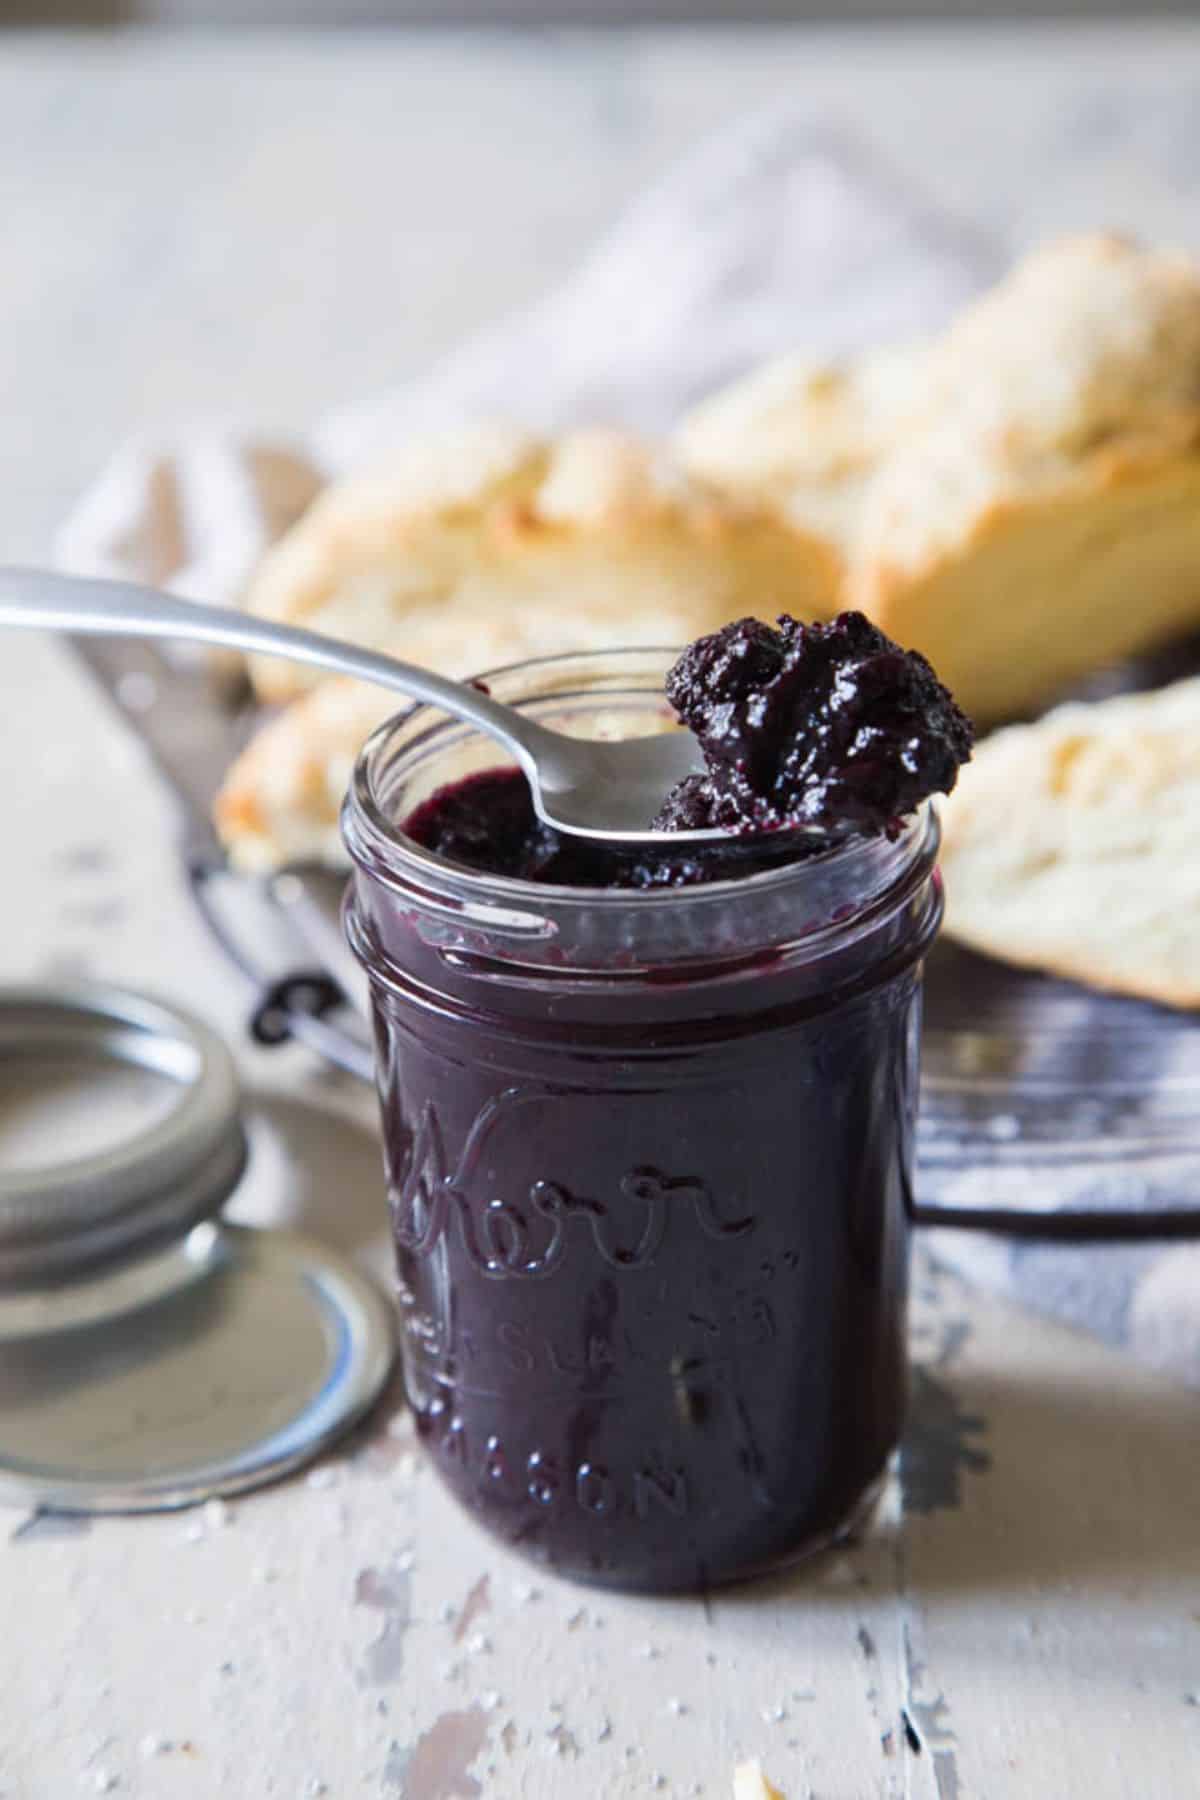 Blueberry butter in a glass jar picked with a spoon.